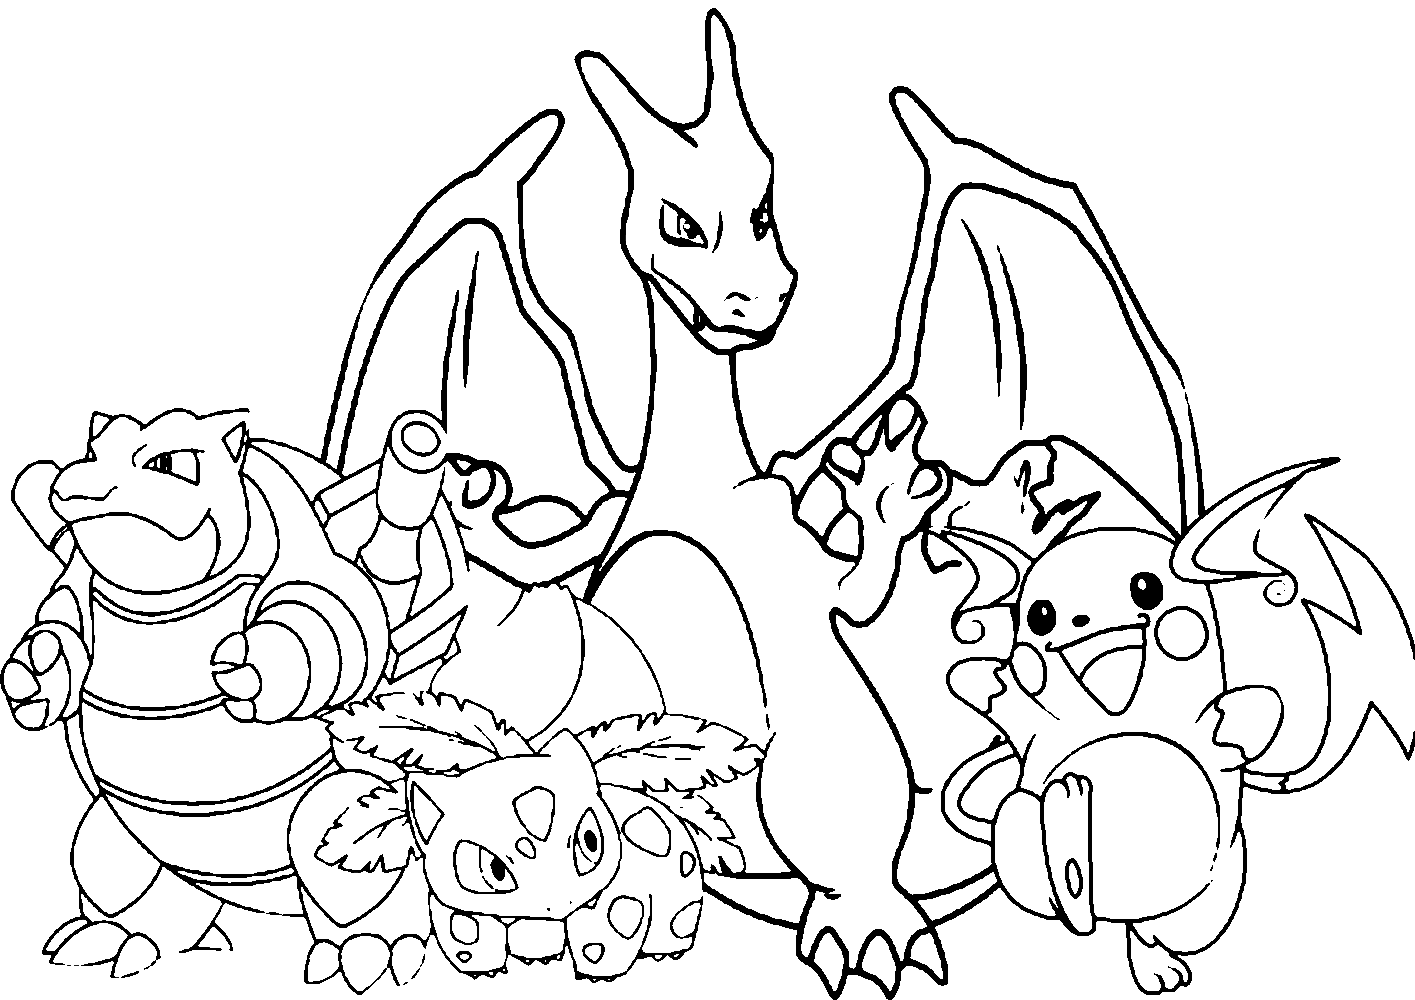 Pokemon Coloring Pages: Printable PDF (Updated)